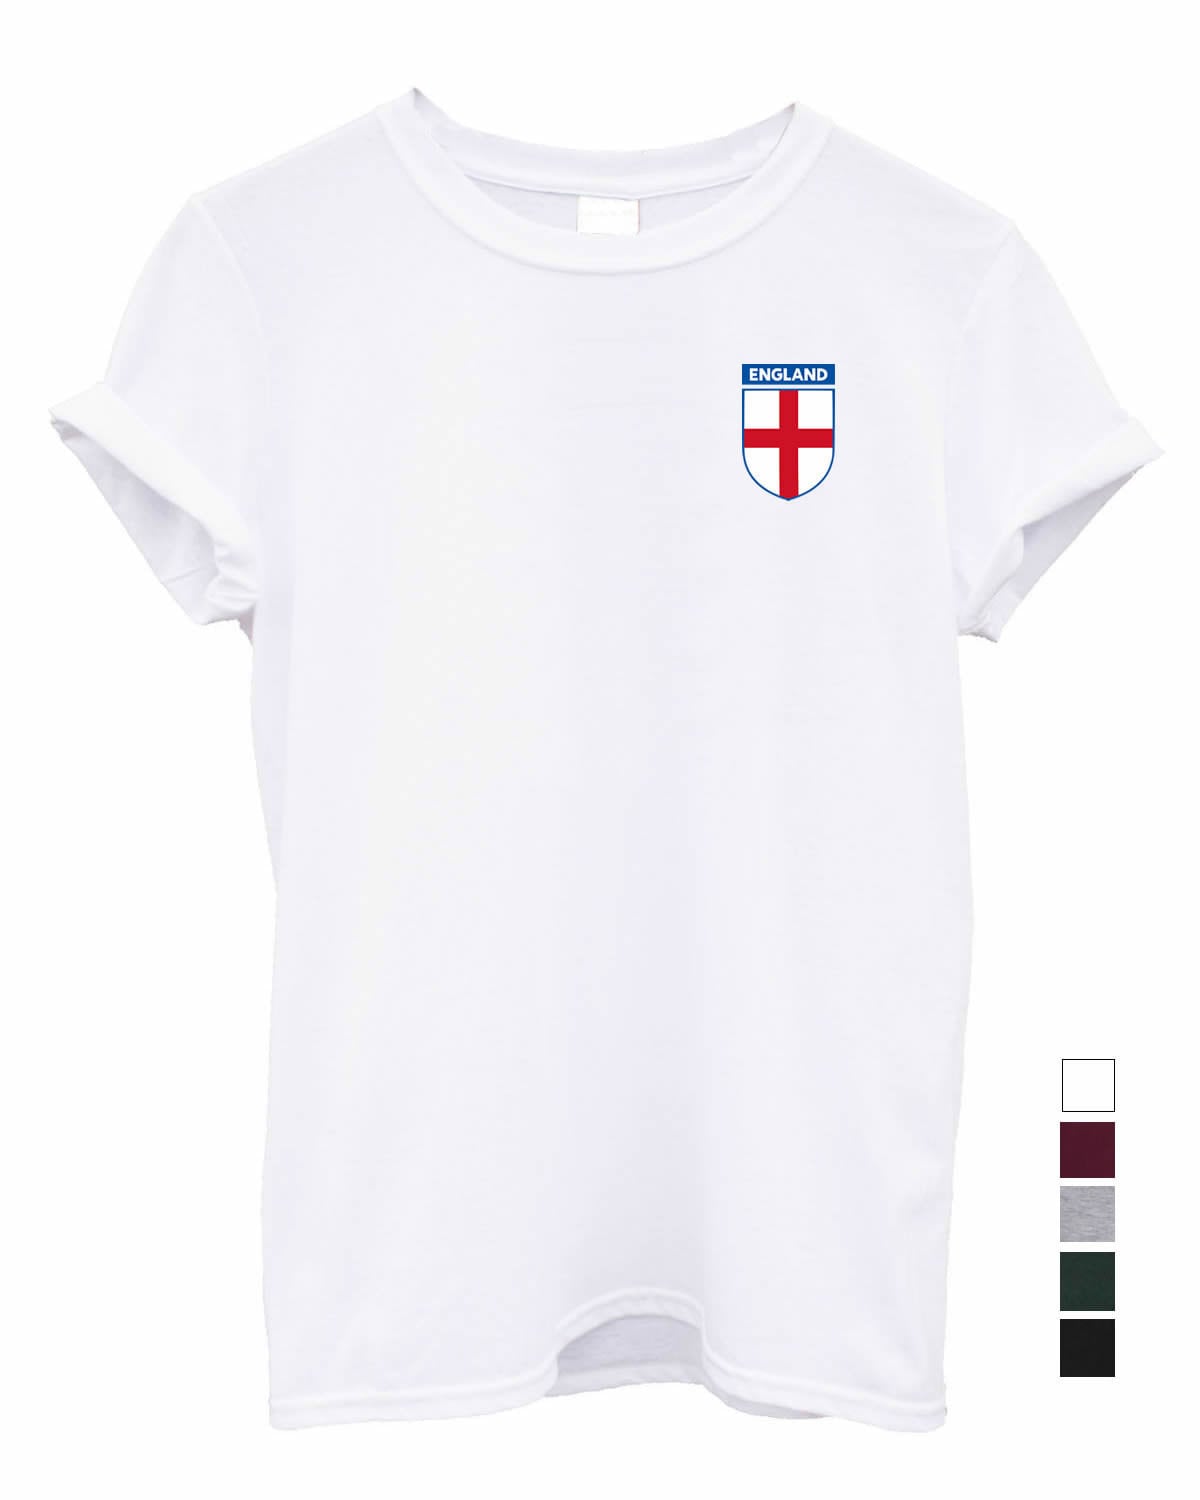 ENGLAND Team Crest Crew neck Tshirt Support your Country football rugby cricket